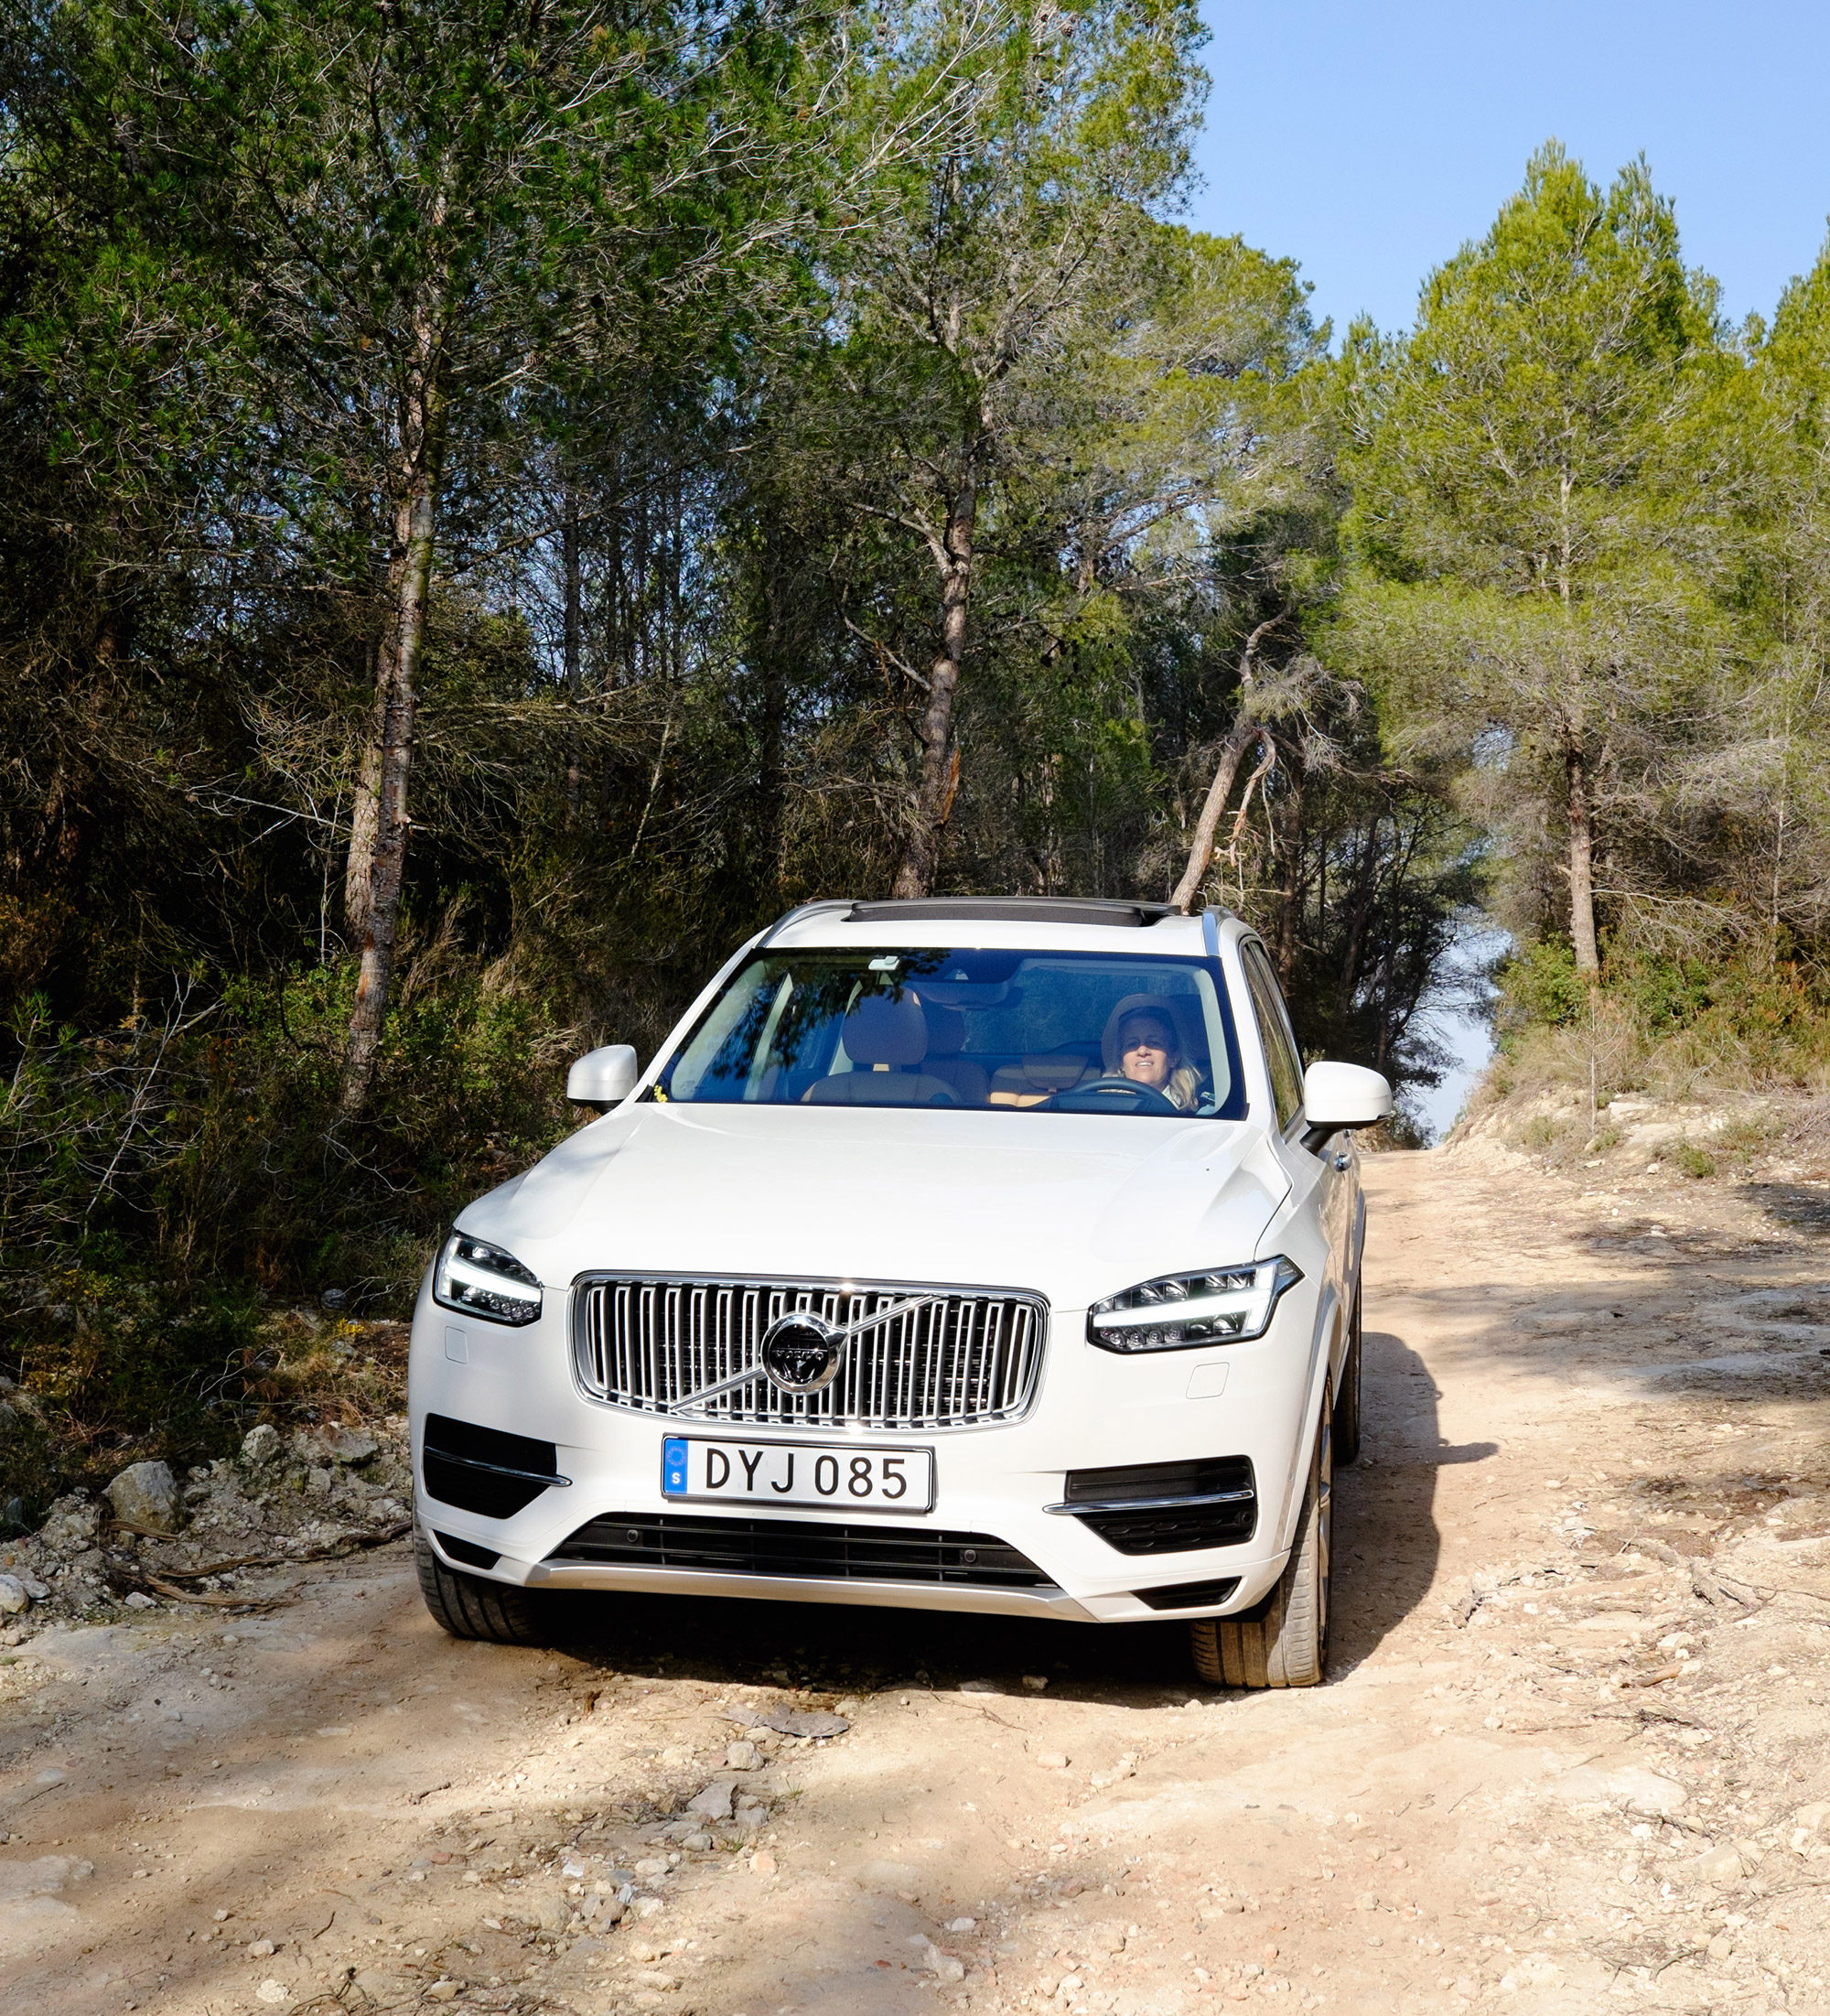 The Beauty Is in the Details: 2016 Volvo XC90 Test Drive